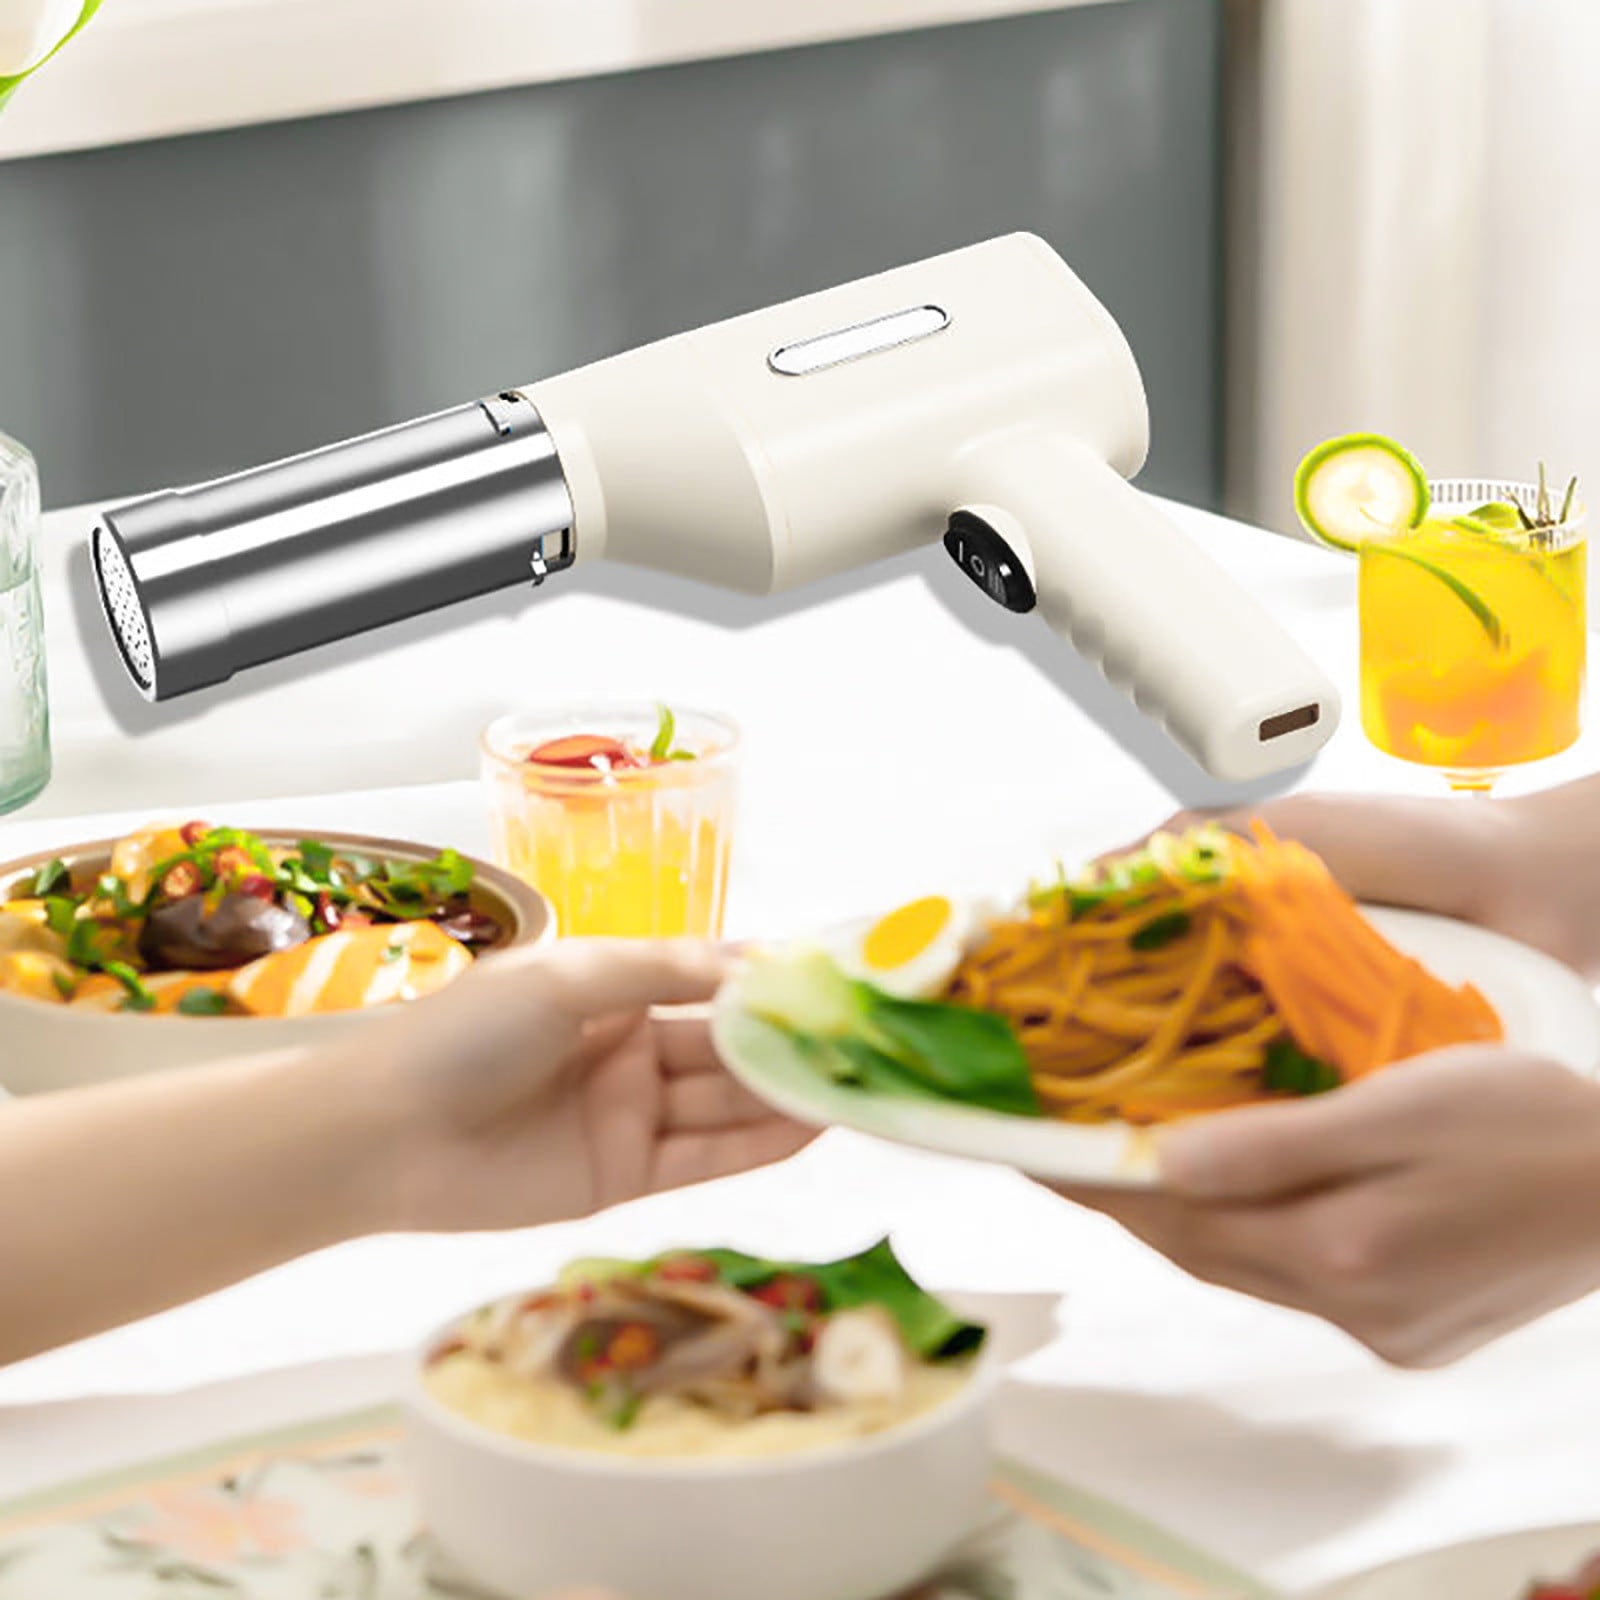 Dough and Noodle Machine Paste Press Home Electric Small Multifunctional  Handheld Wireless Gun Pasta Making Kneading Automaton